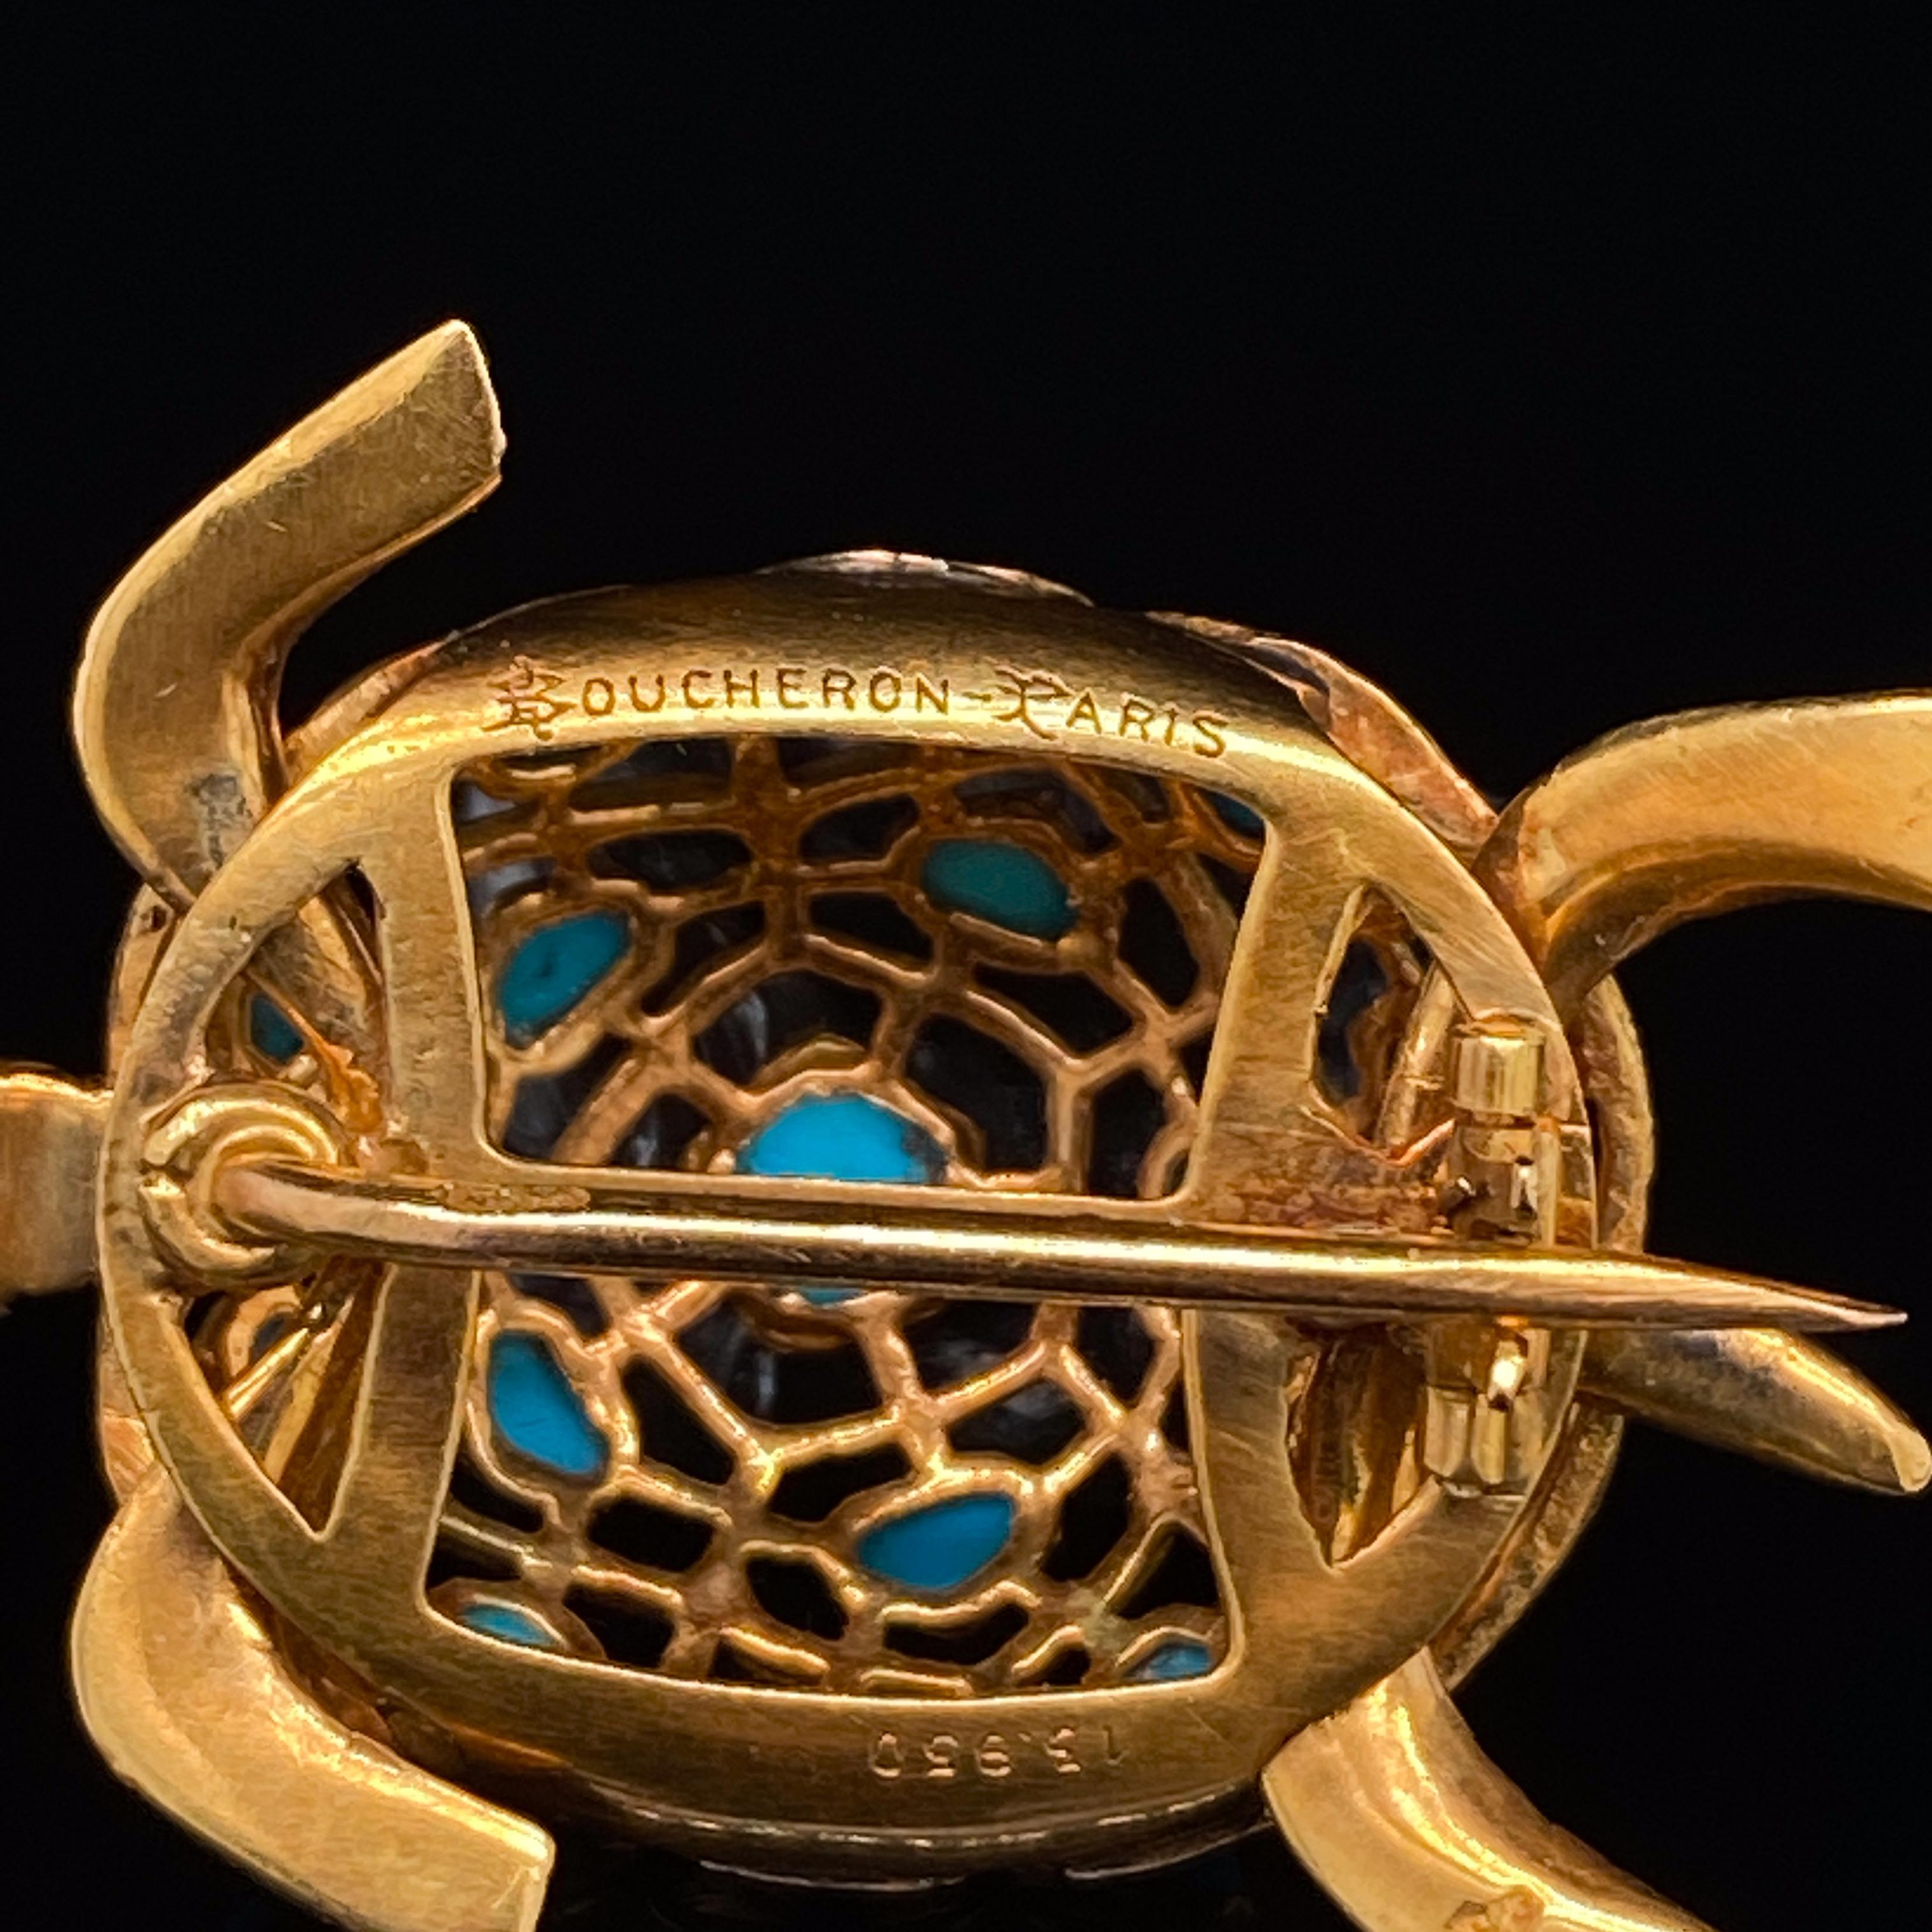 An utterly charming 18 Karat Yellow Gold turtle brooch crafted by the prestigious Parisian jeweller, Boucheron.

This vintage turtle pin brooch is highly collectible. Its shell features a gold open work design bezel set with 16 turquoise cabochons.